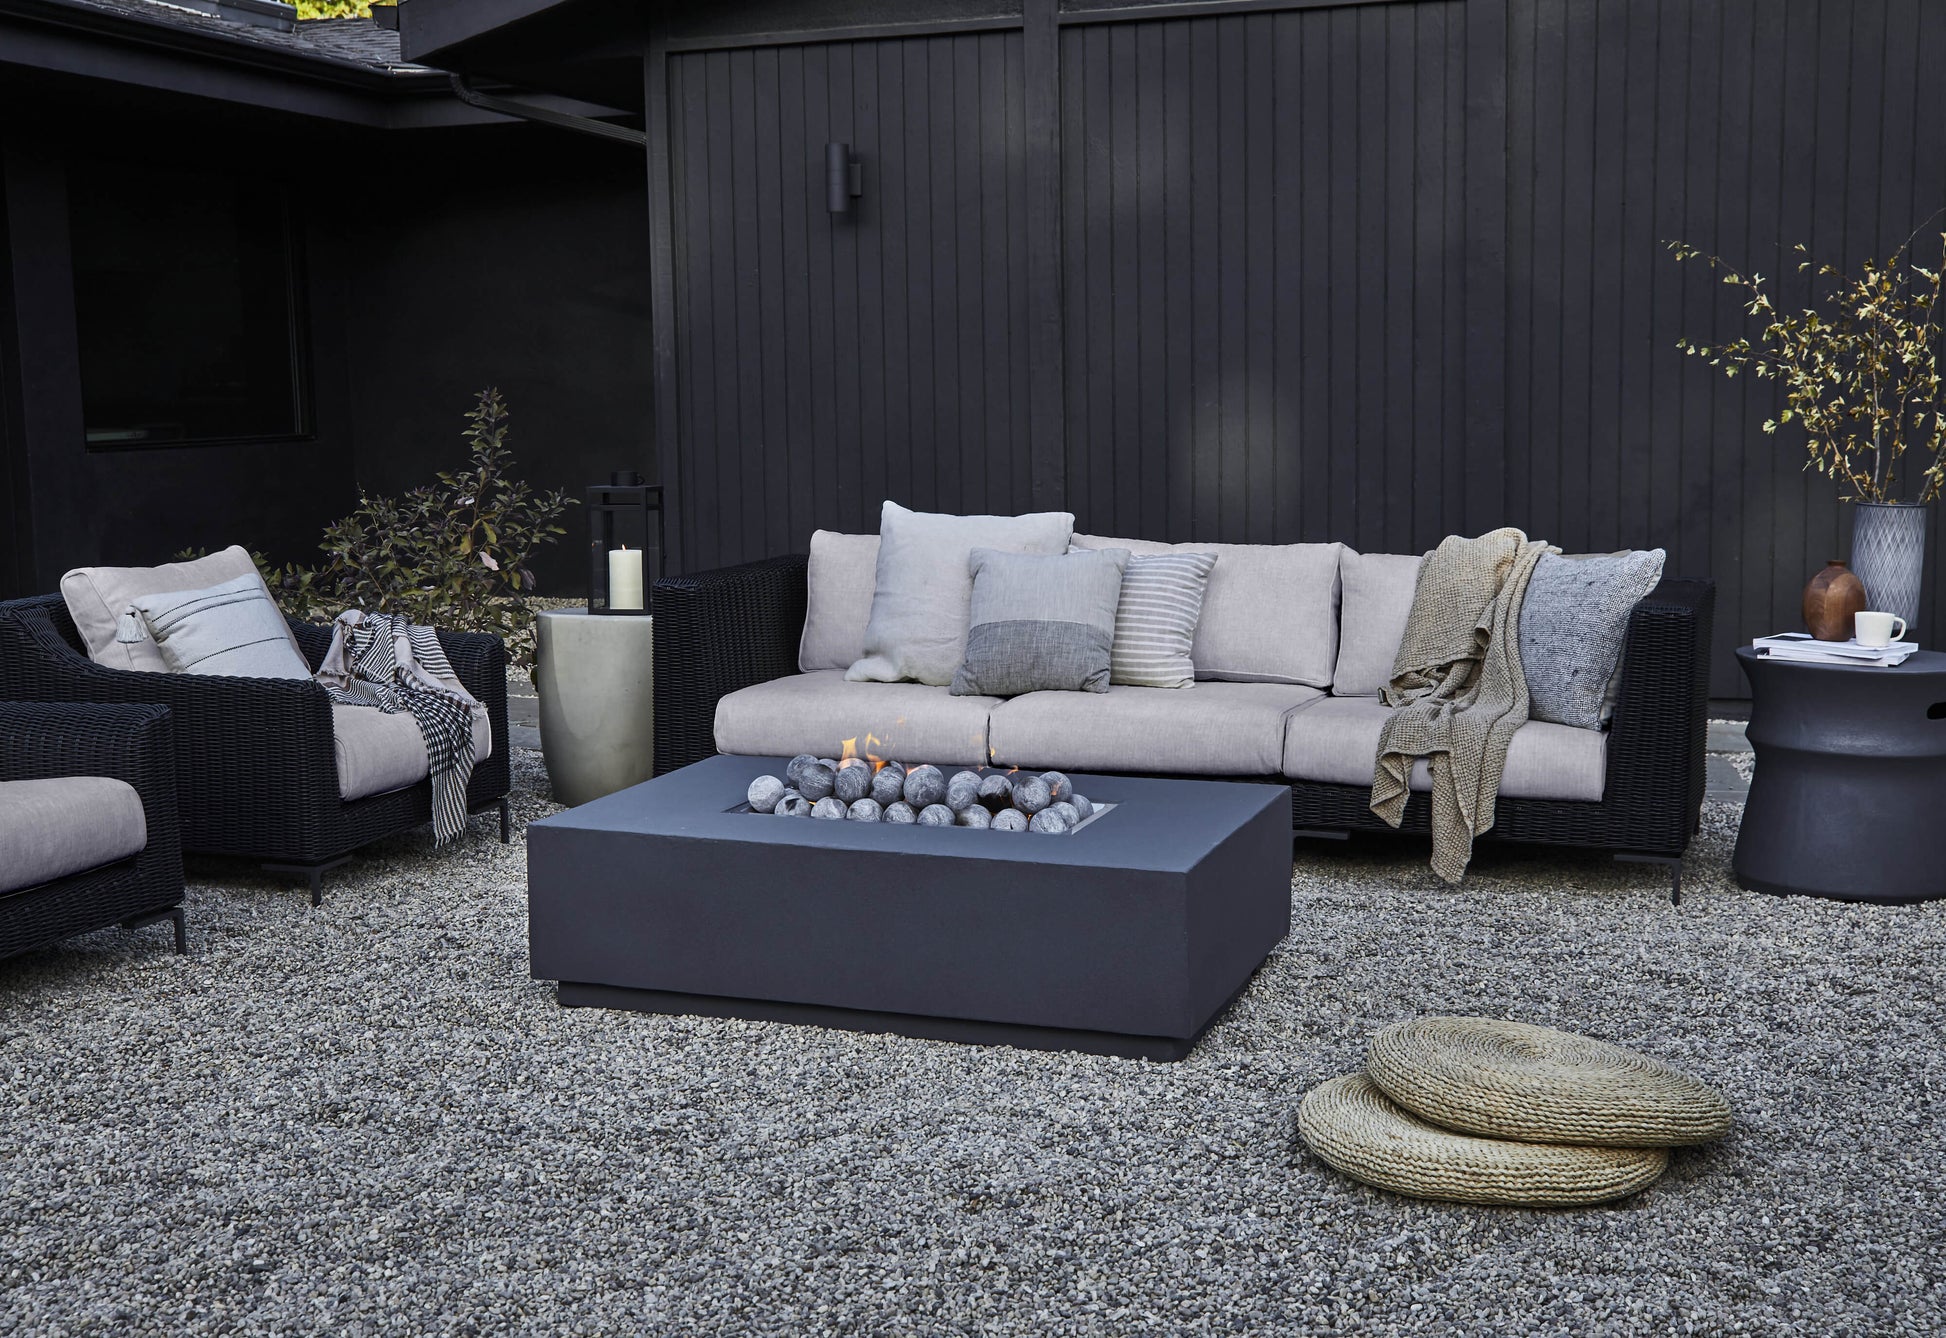 Live Outer 132" x 66" Black Wicker Outdoor L Shape Sectional 5-Seat With Sandstone Gray Cushion